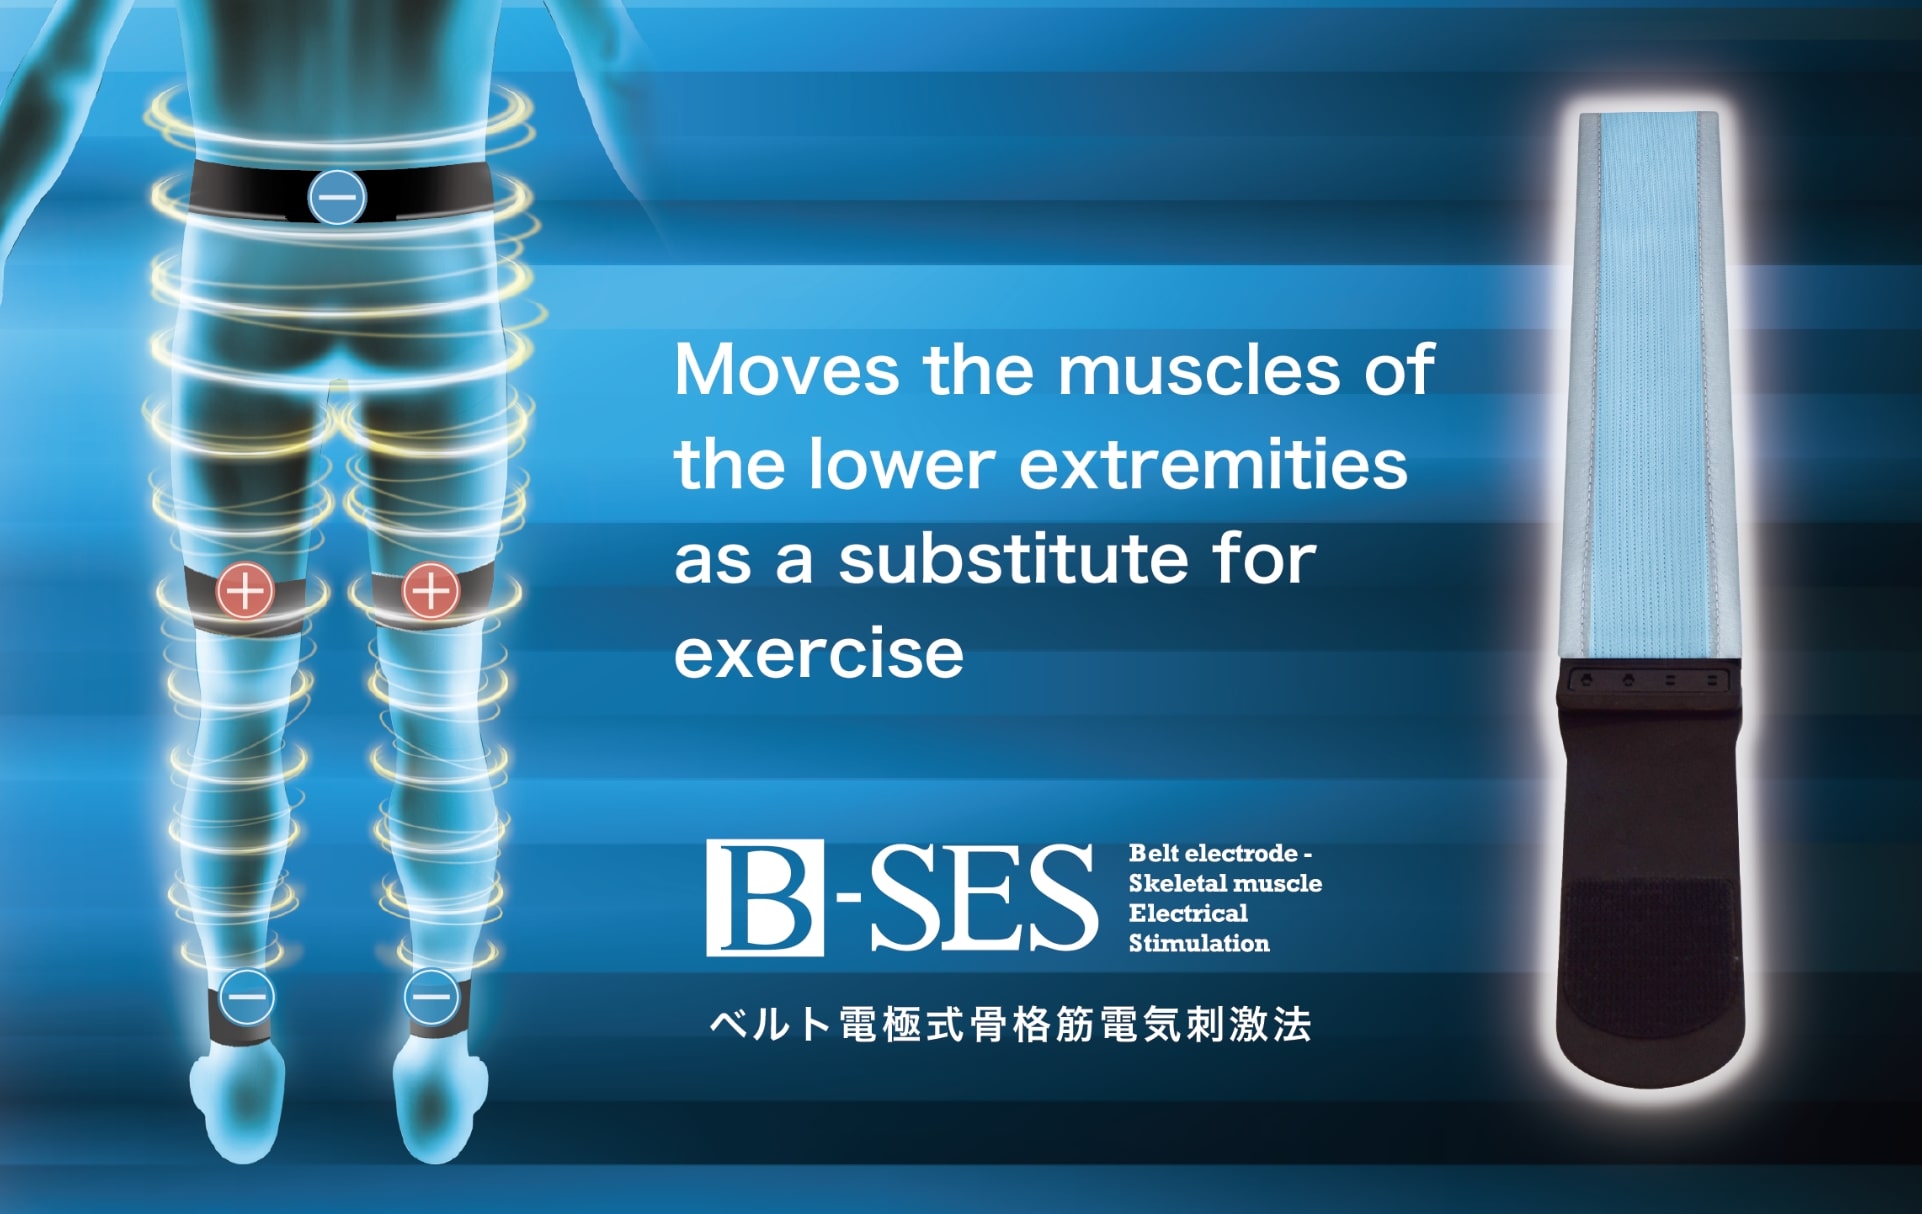 Movdes the muscles of the lower extremities as a substitute for exercise